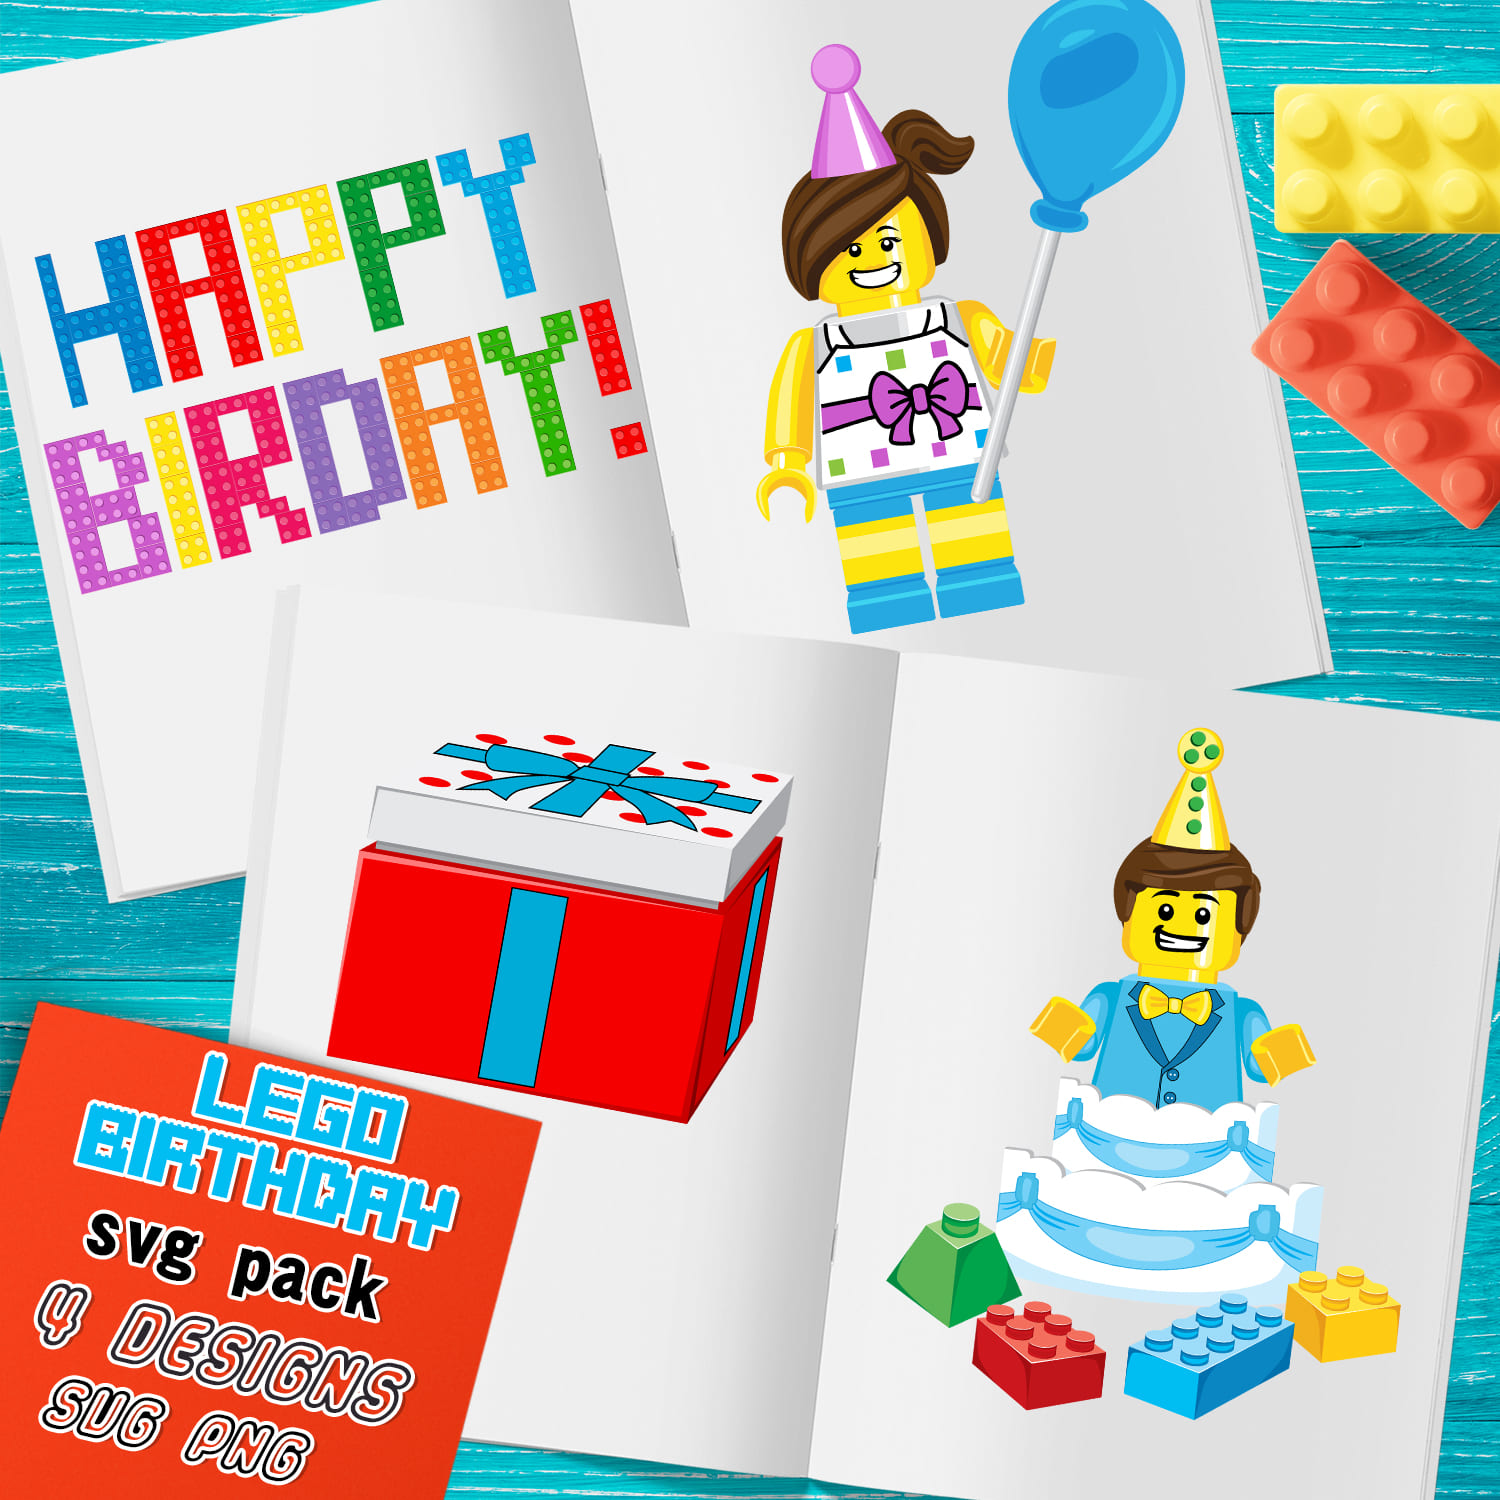 Lego birthday svg - main image preview.